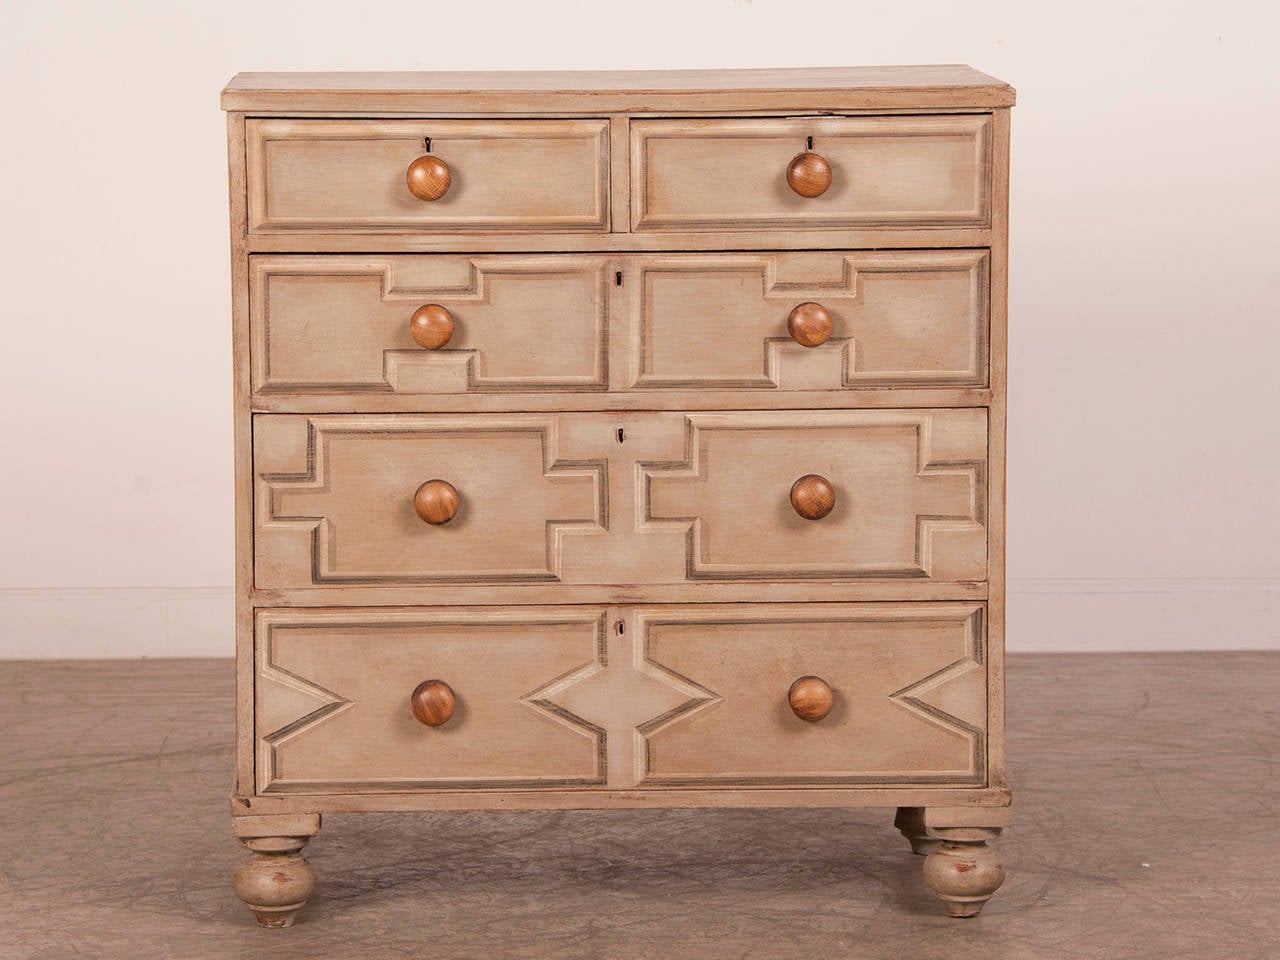 A large pine chest with five drawers from England c.1865 standing on the original turned feet now decorated with a custom painted finish with a geometric pattern reminiscent of the Jacobean period. The painter's use of shaded colours to create a